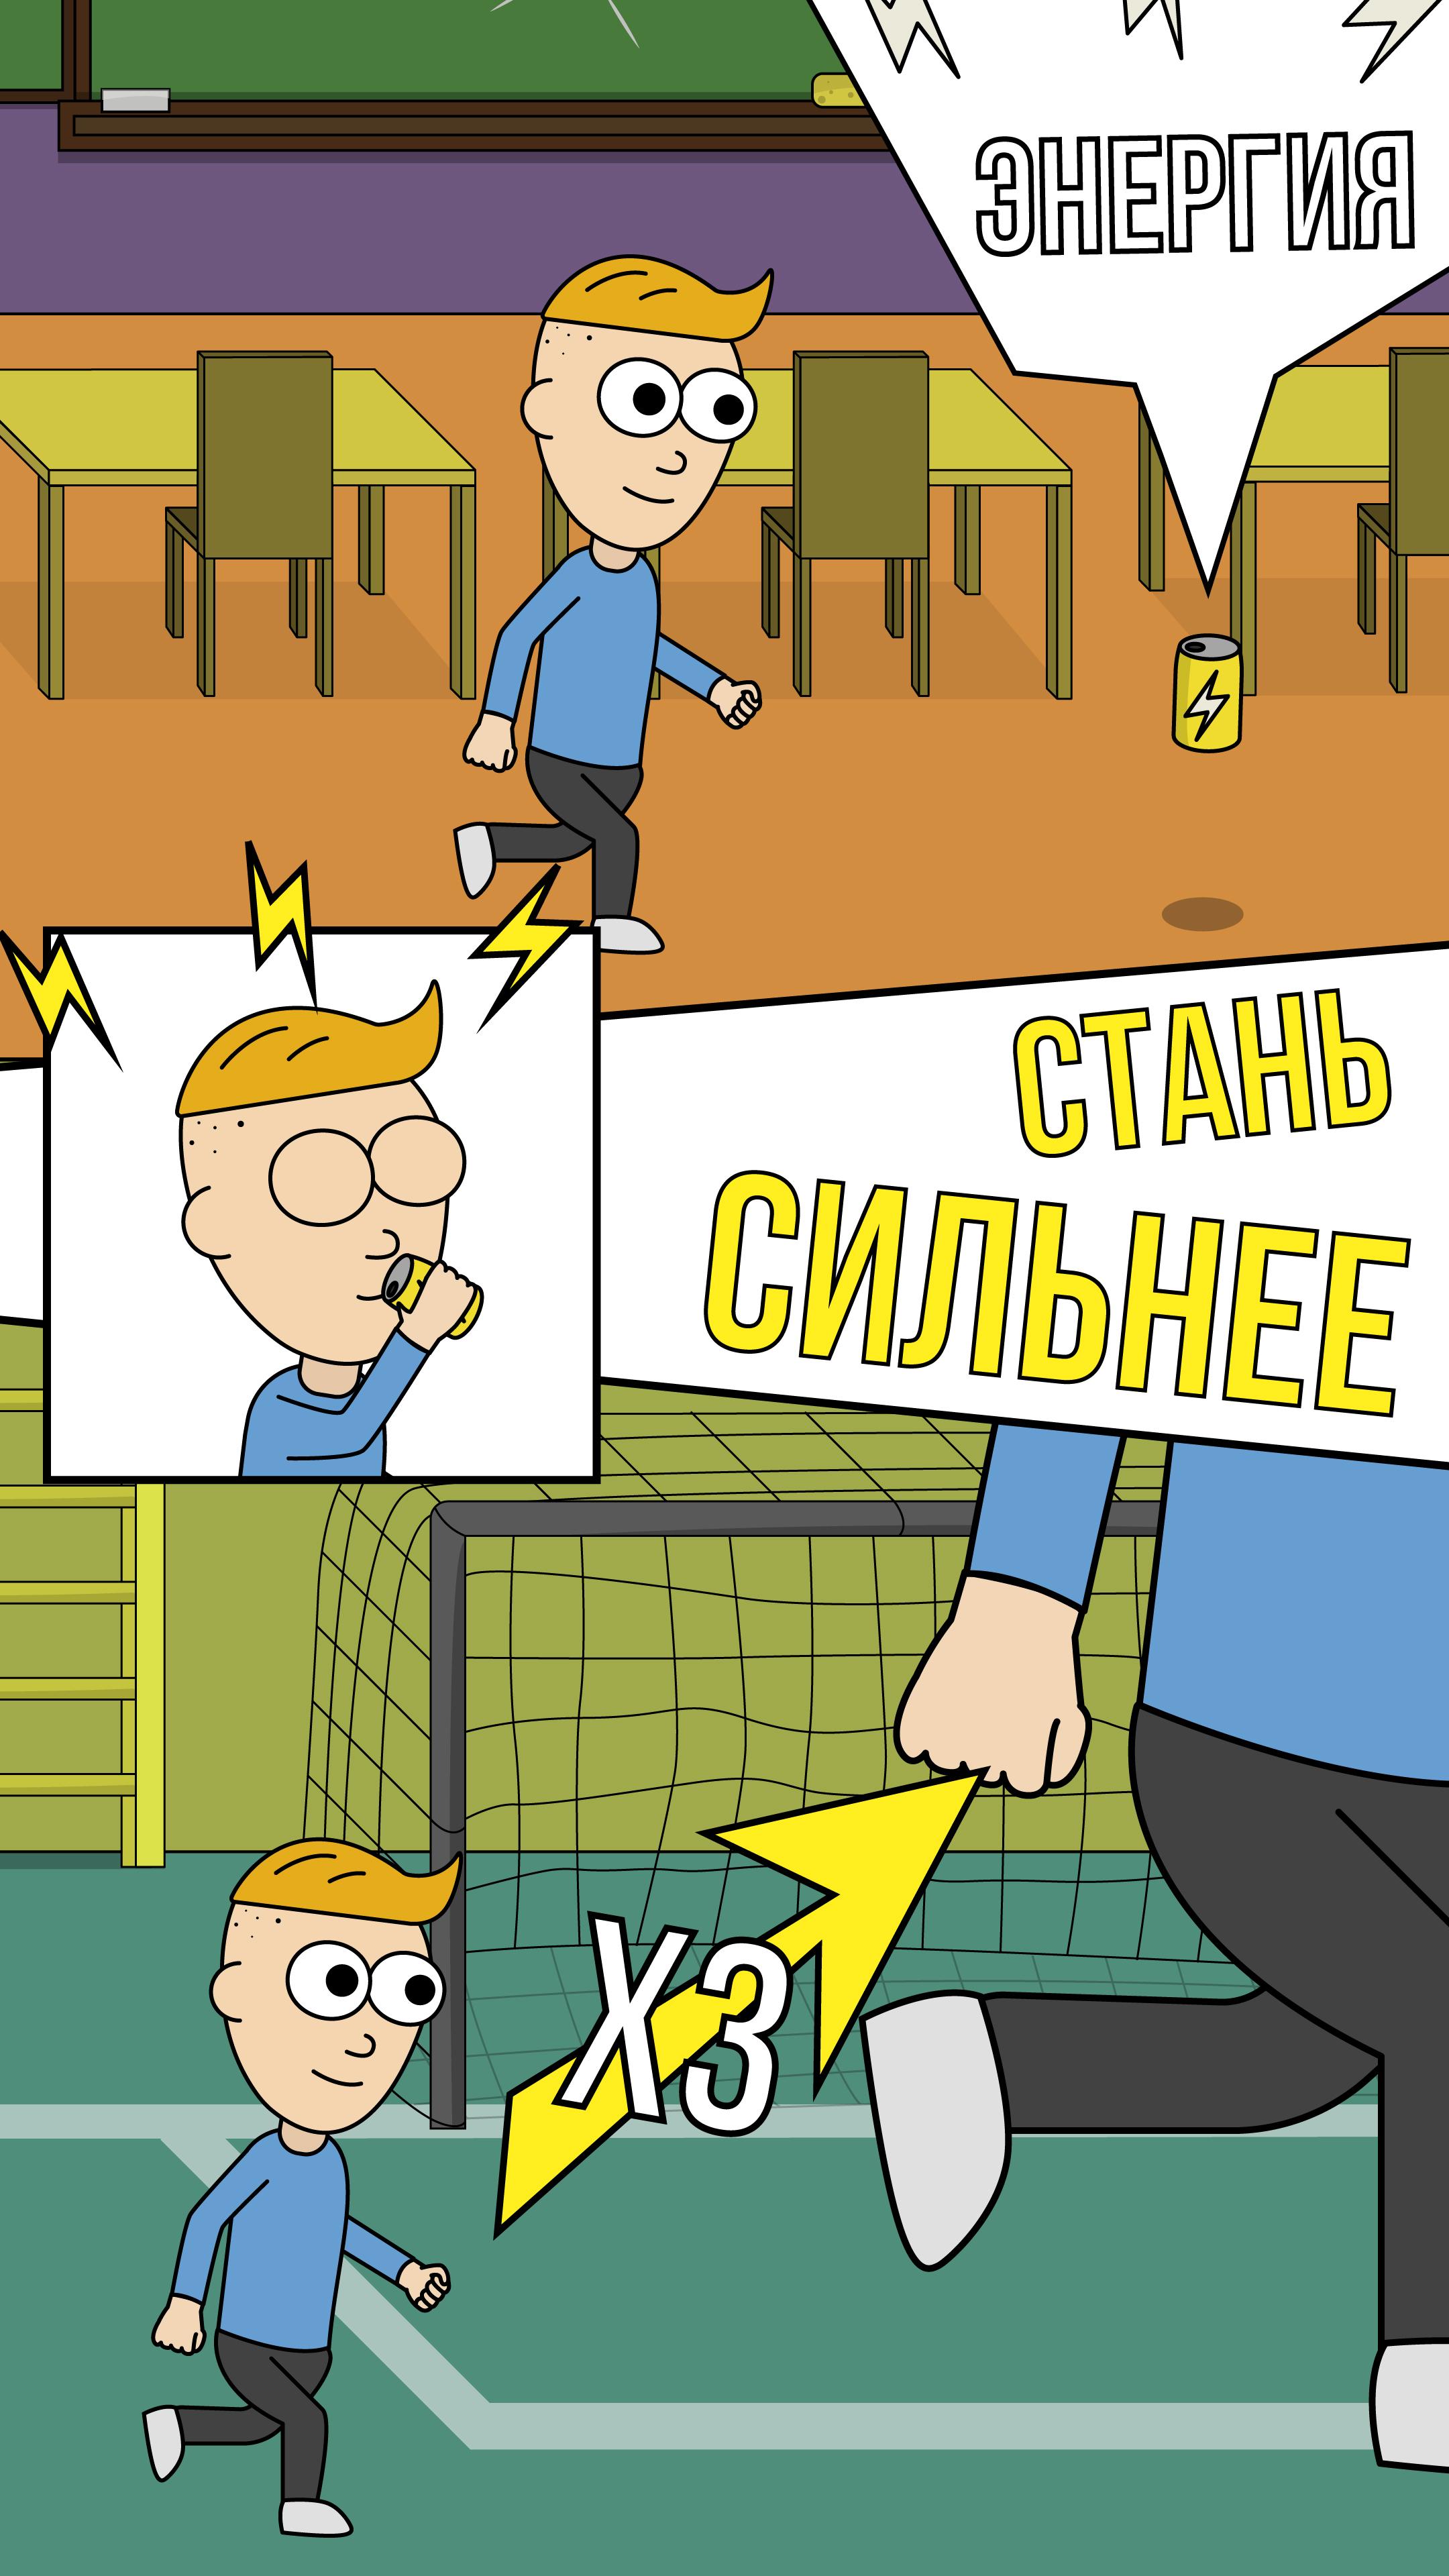 The rudy games. The Rudy games игра. The Rudy games рисунки.